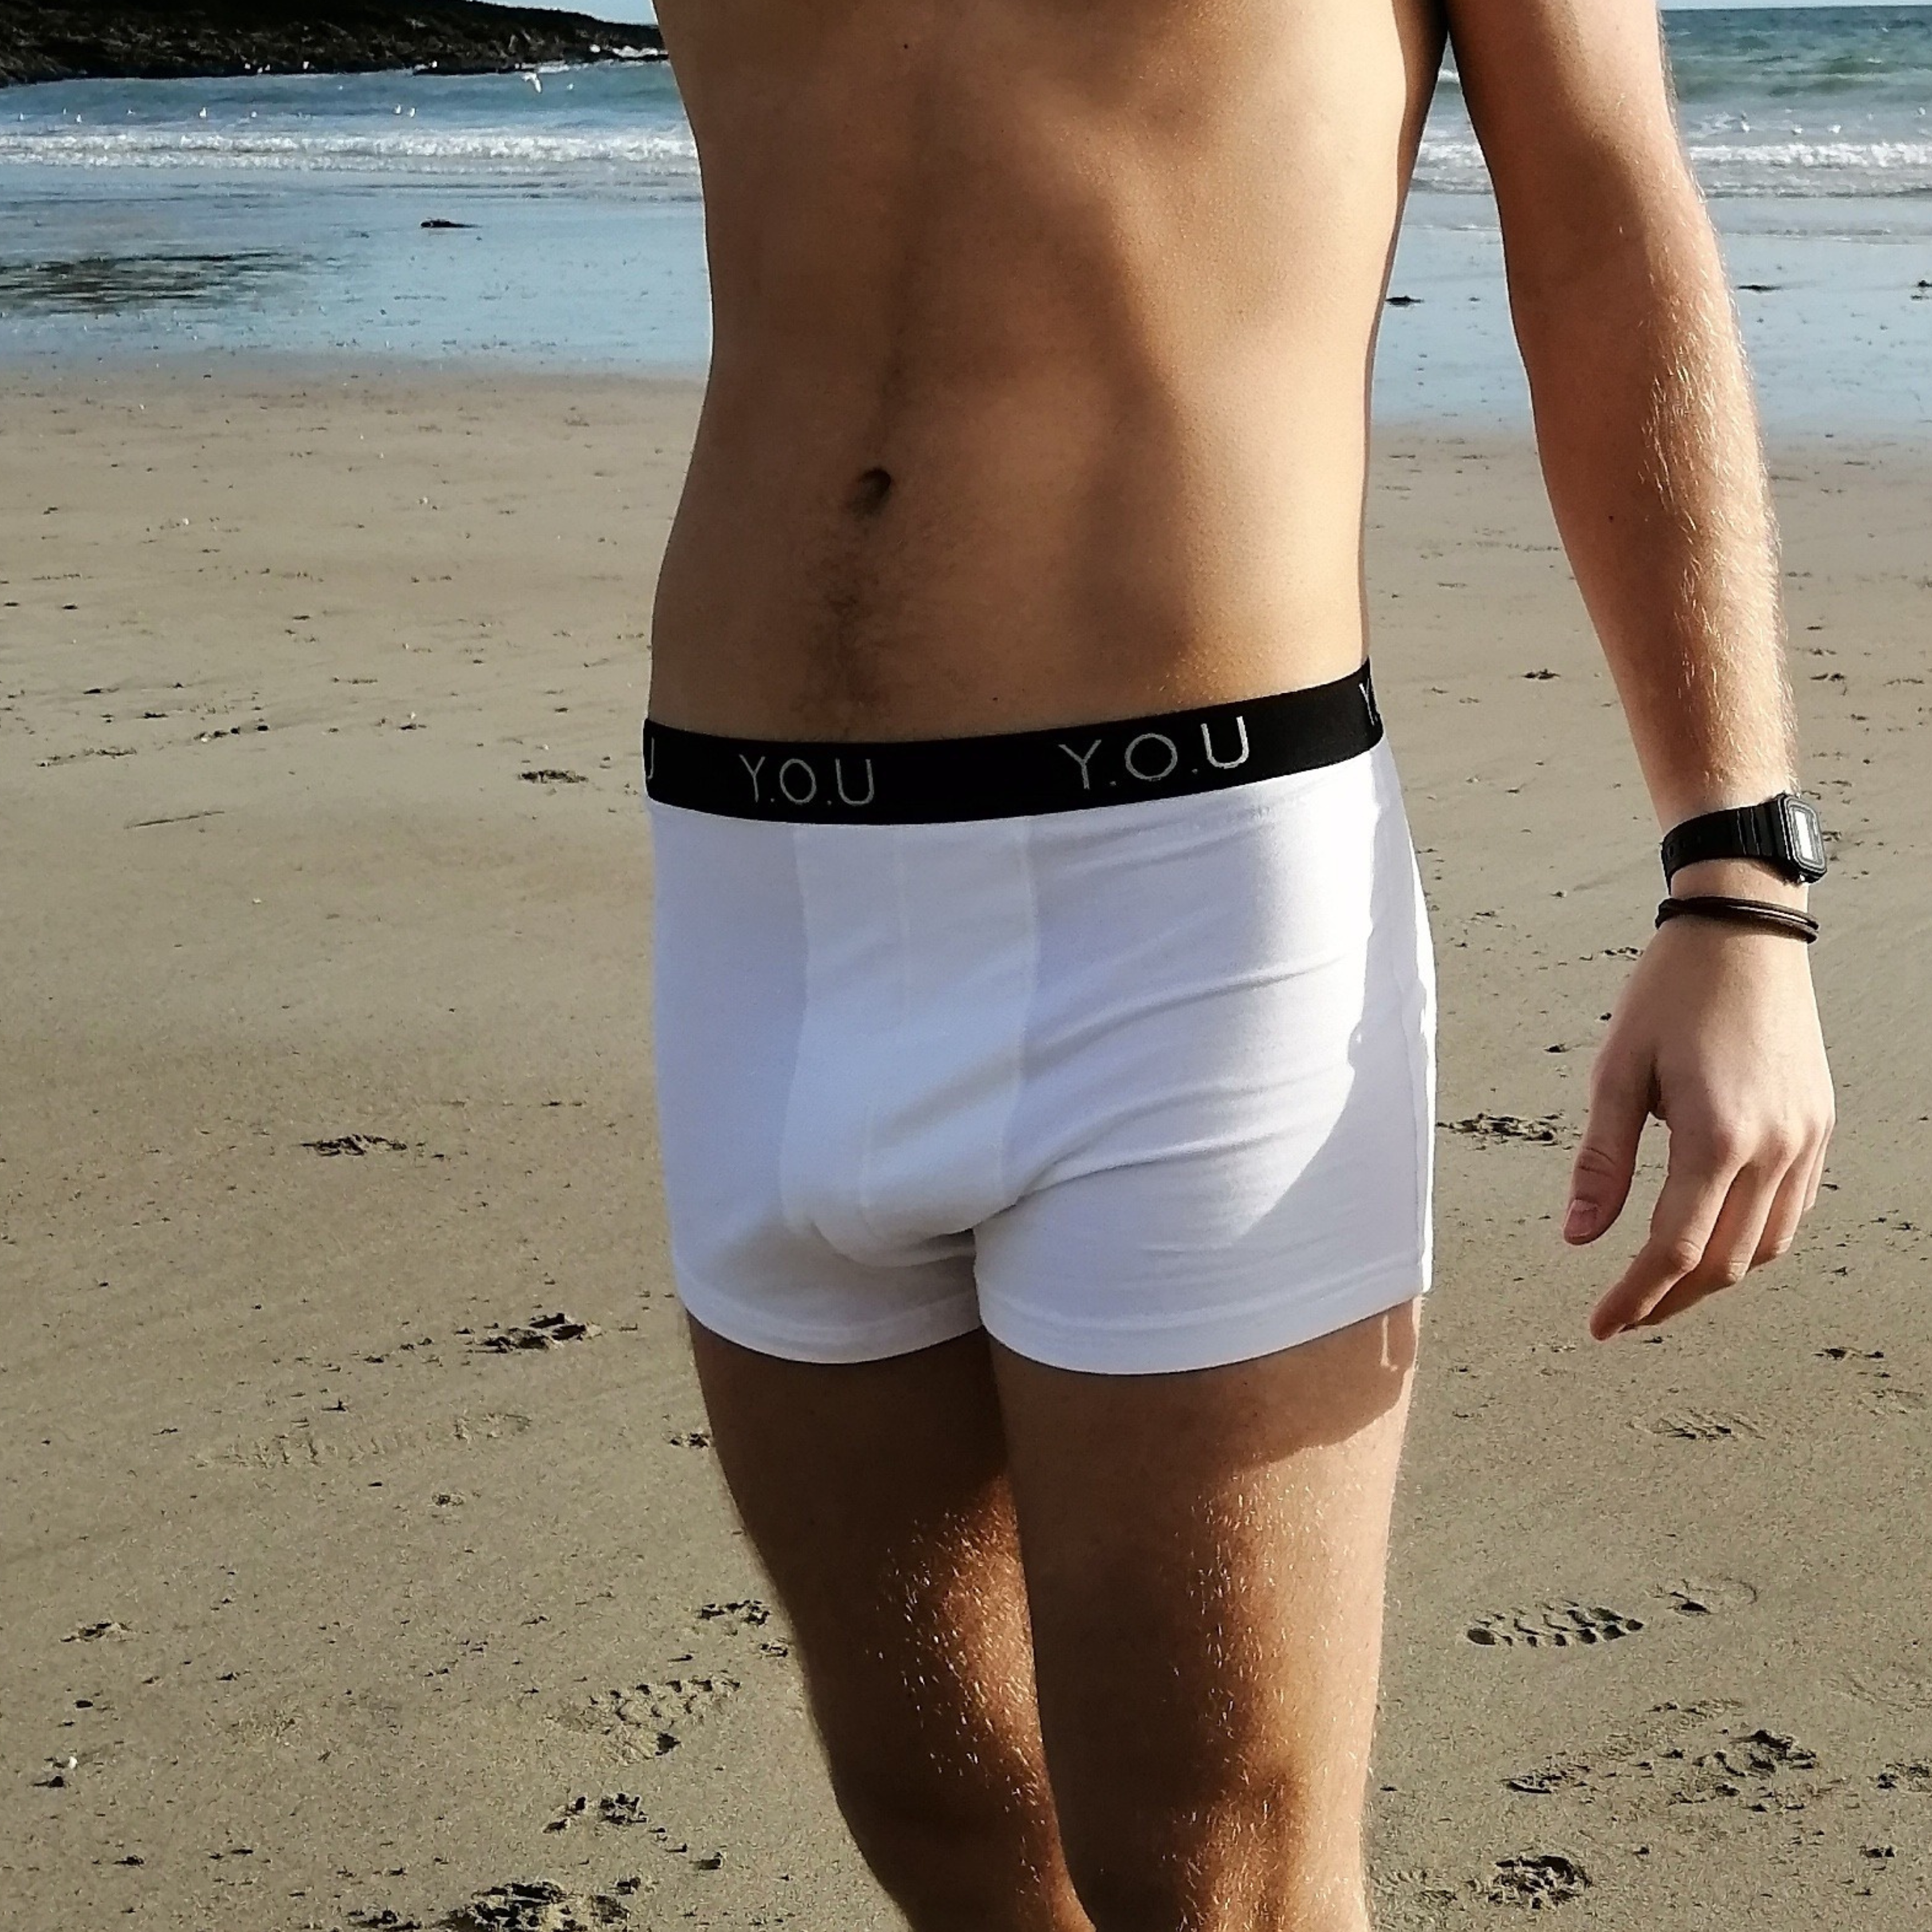 A person wearing white Y.O.U brand men’s hipster trunks and a wristband on their left wrist stands on a sandy beach. Only the lower torso, from mid-chest to mid-thigh, is visible. The beach and waves are in the background.